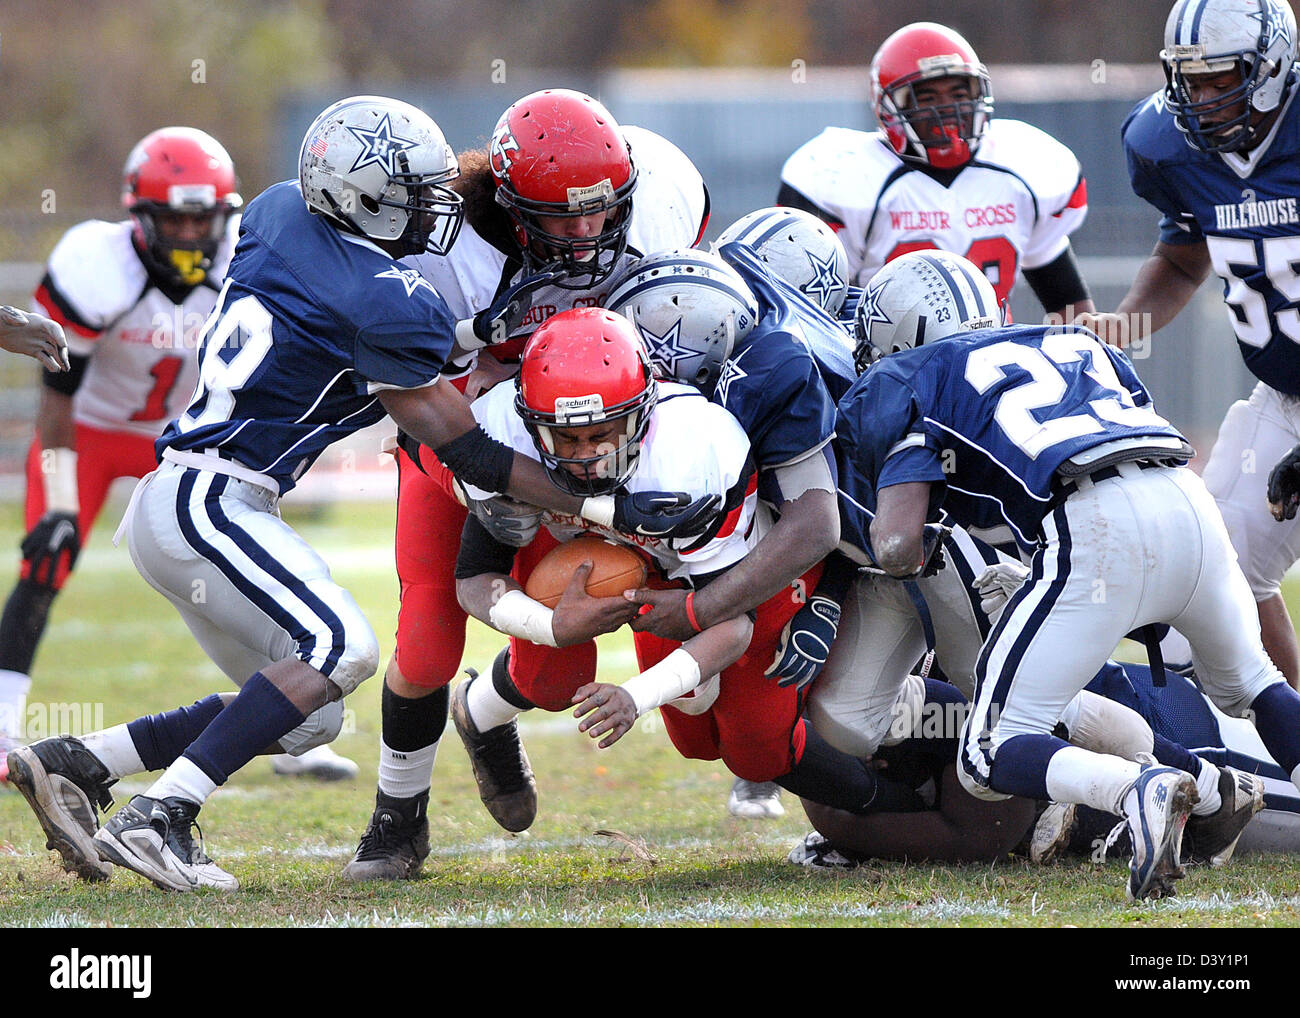 High school football game in New Haven CT USA between cross town rivals Wilbur Cross and Hillhouse High Schools Stock Photo